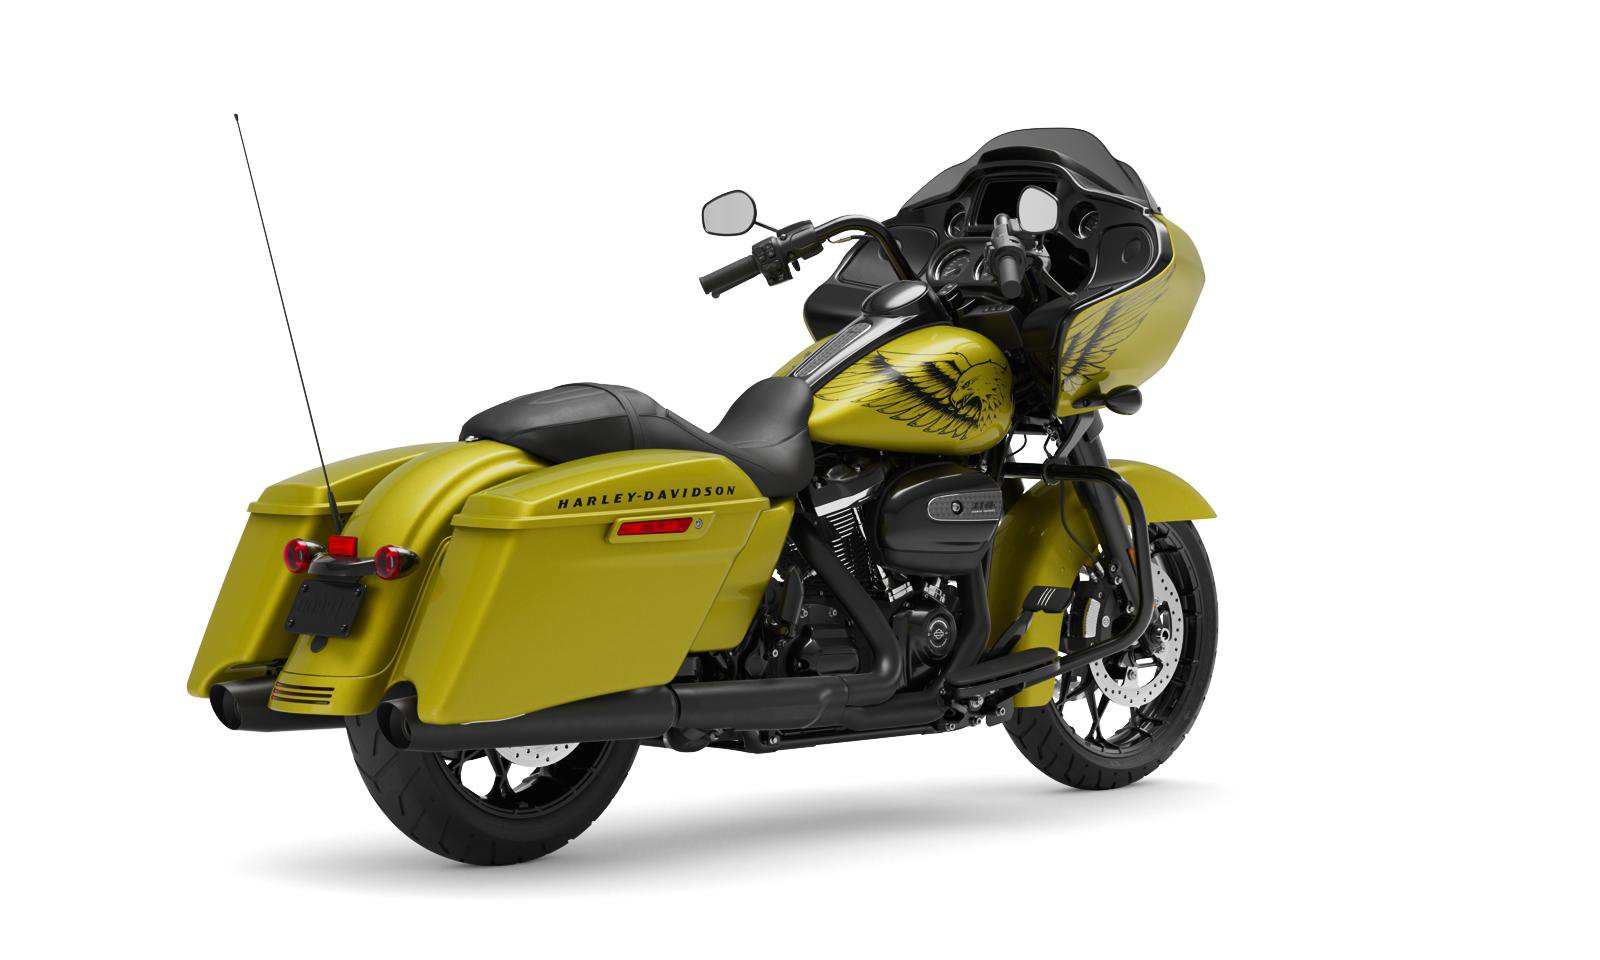 2020 Road Glide Special Motorcycle Harley Davidson Middle East